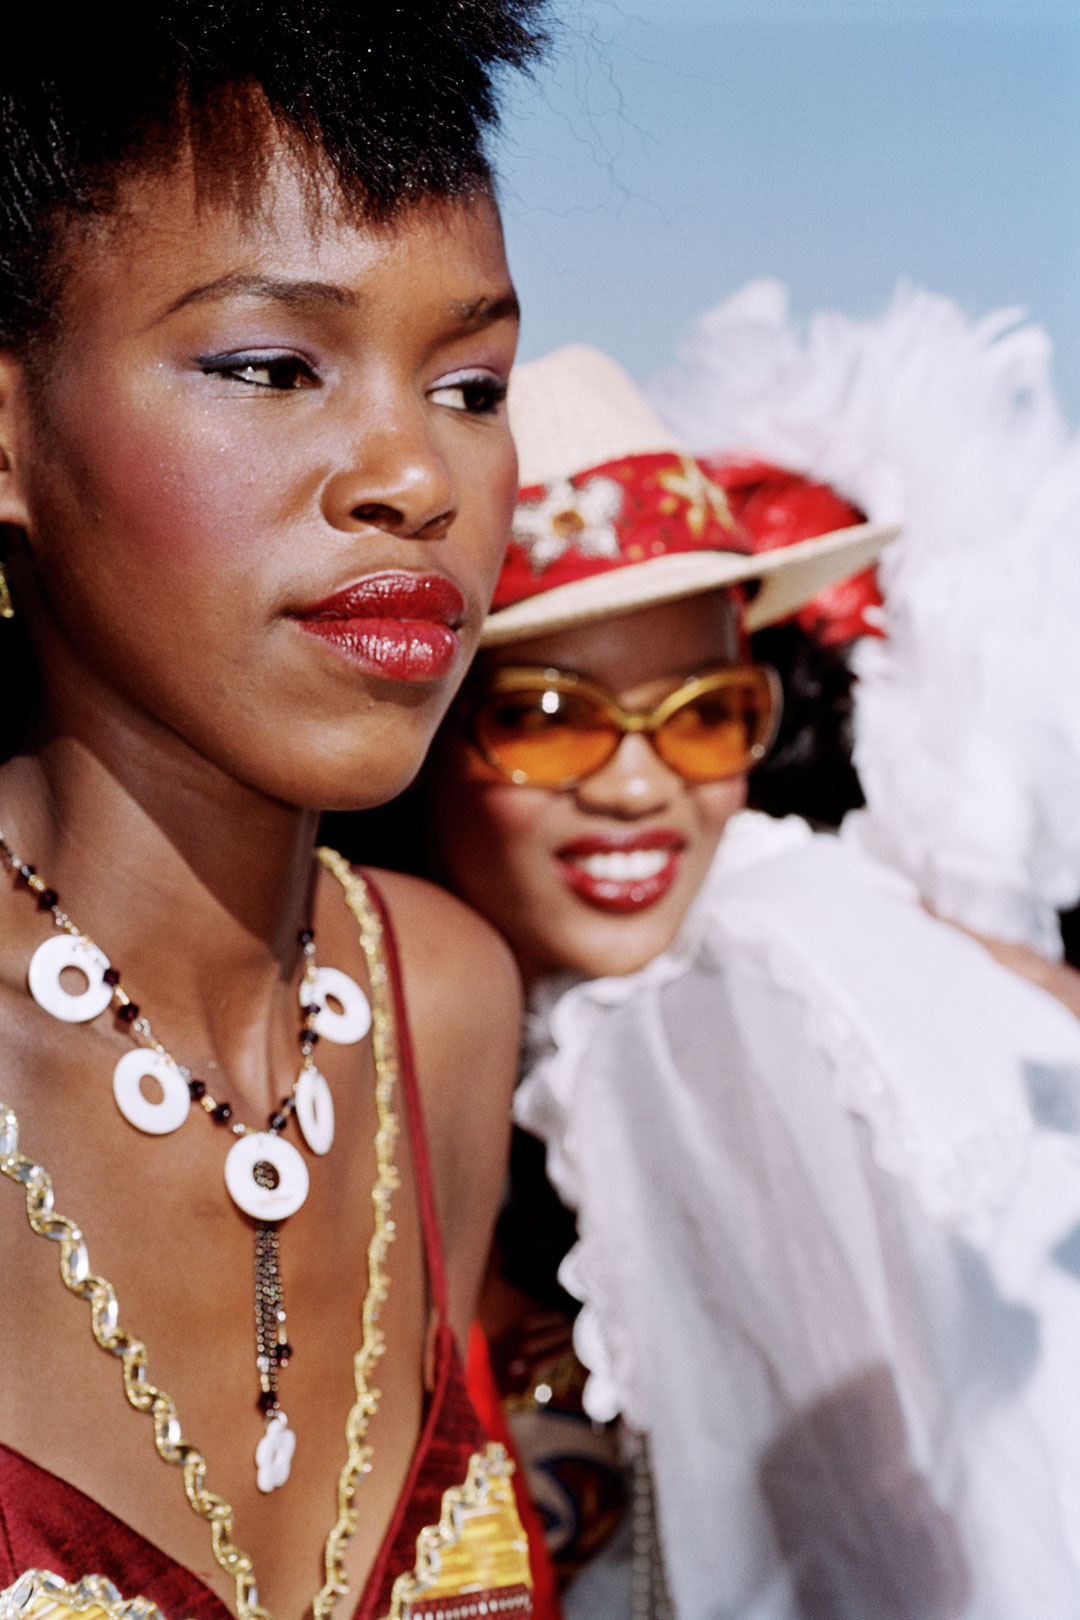 Durban July races, South Africa, 2005, by Martin Parr